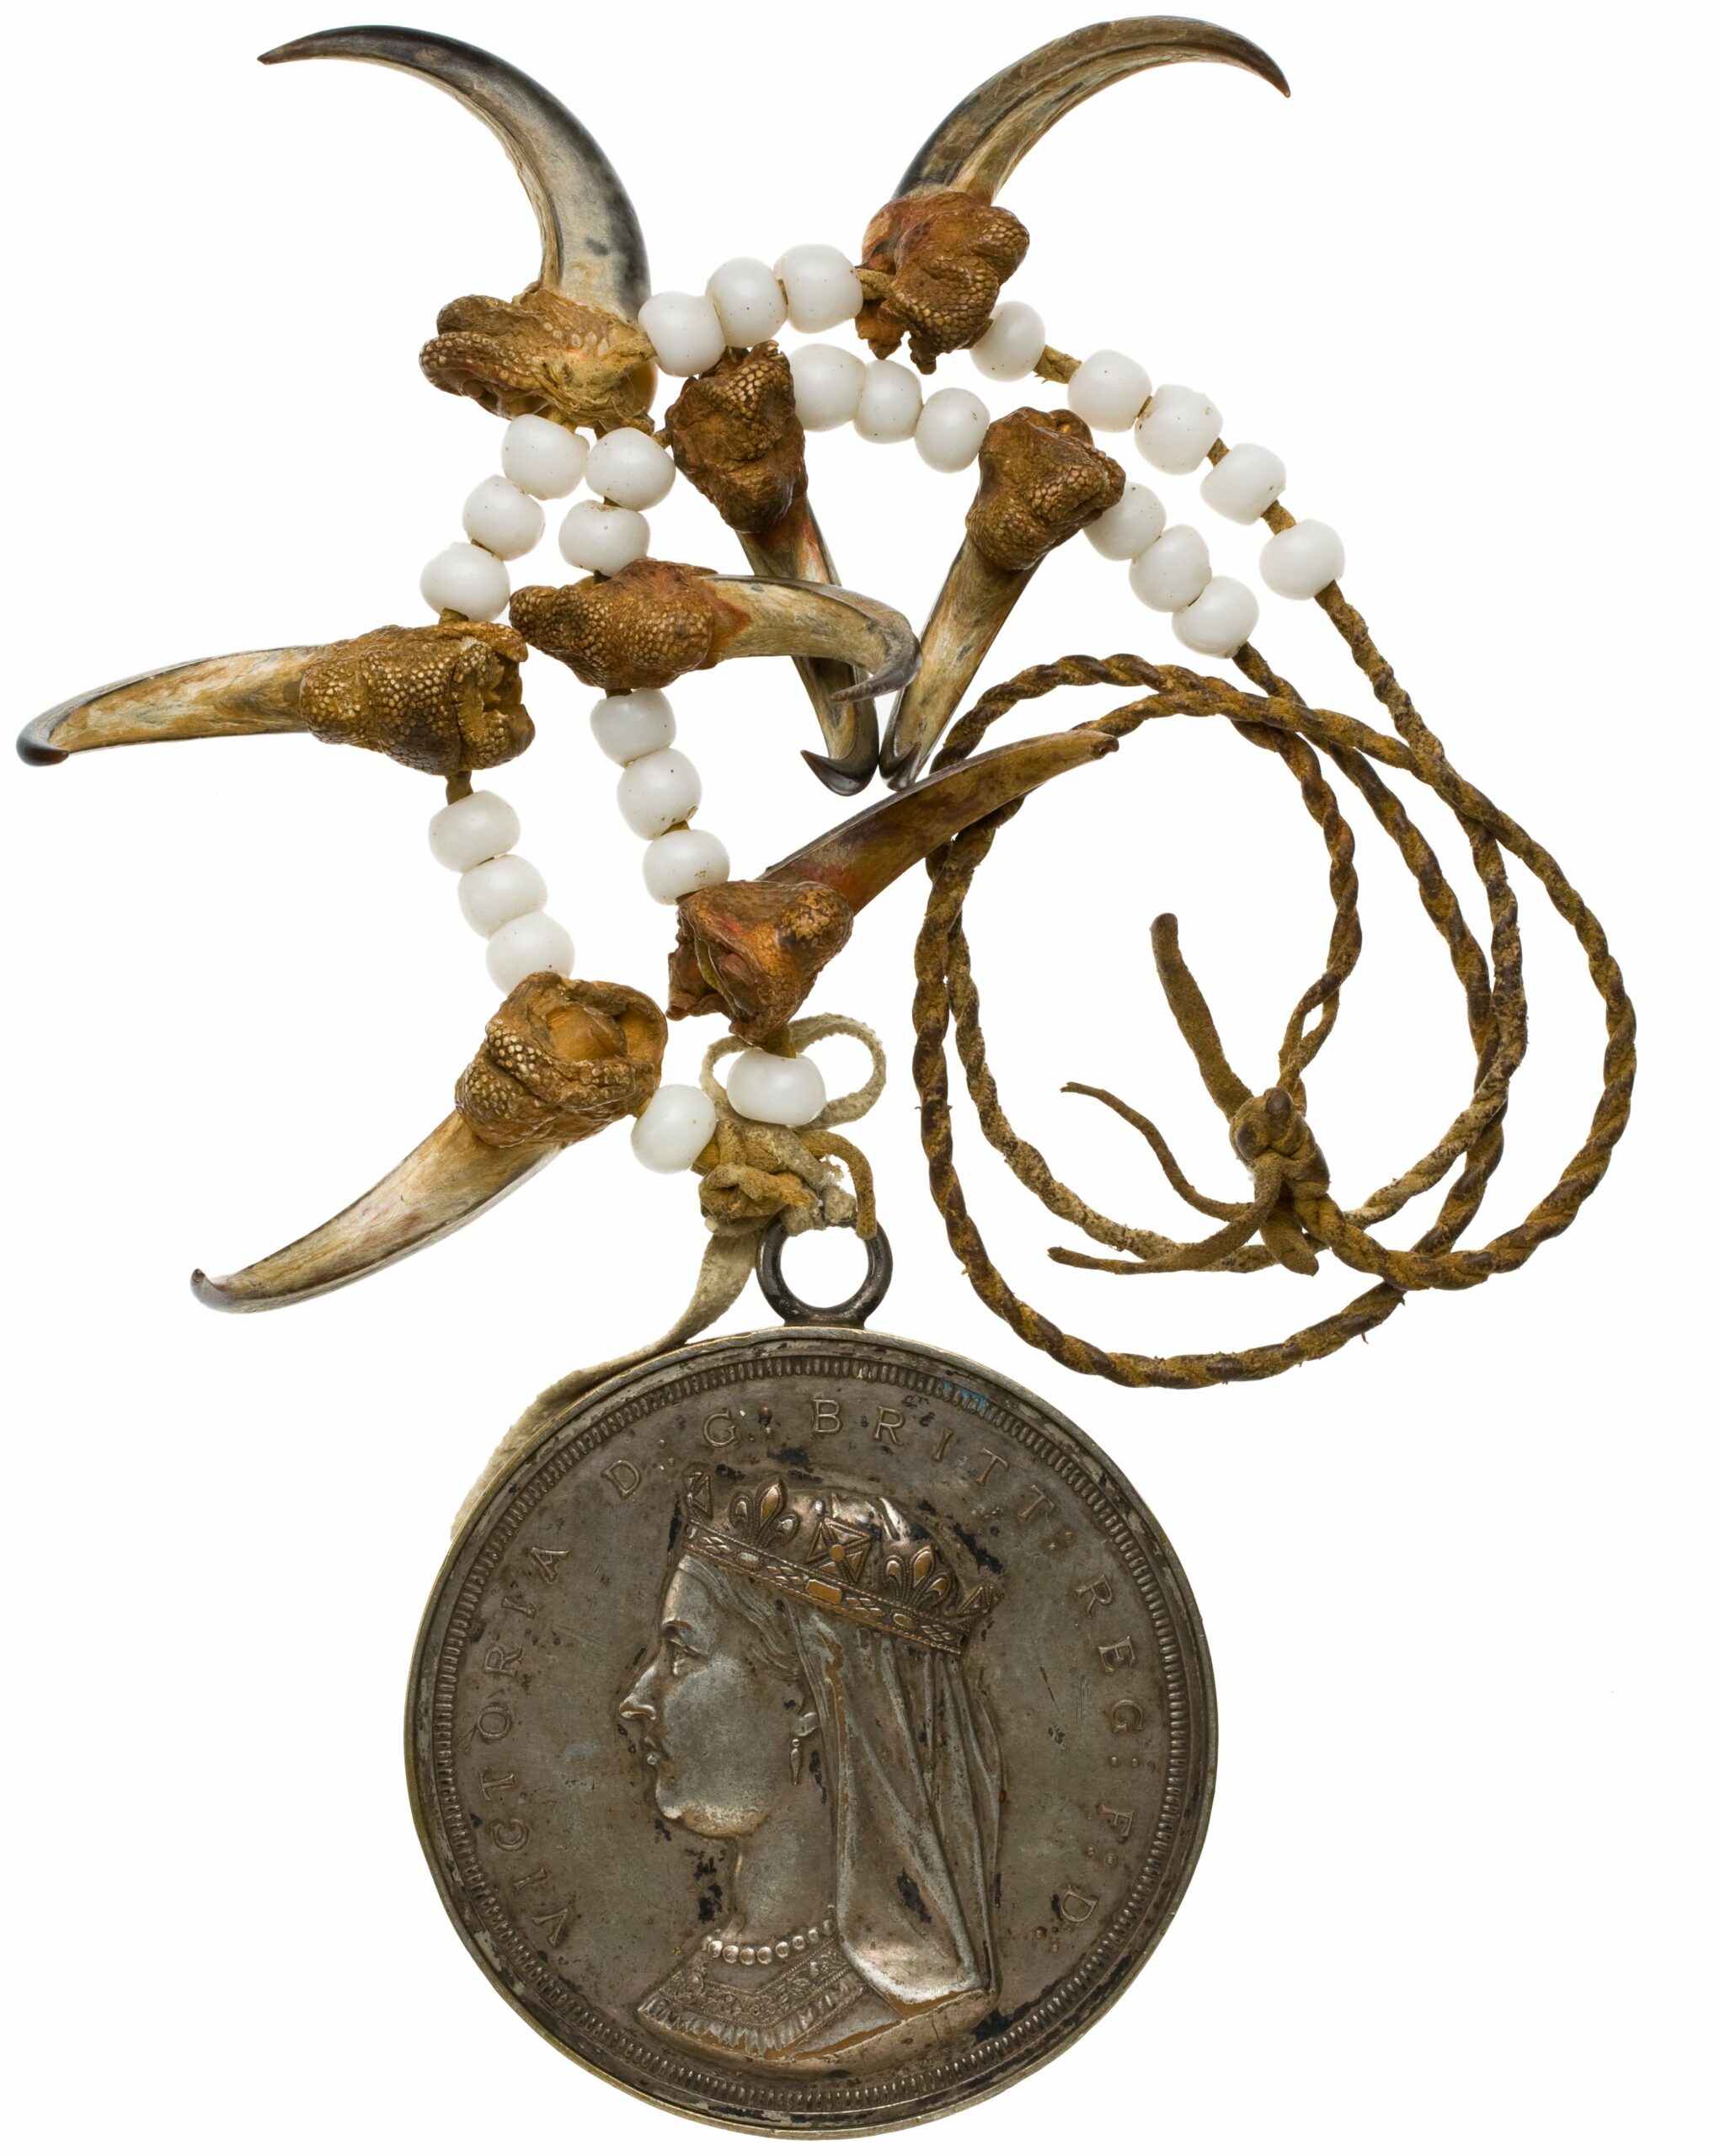 Canadian Indian Treaty Medals and the Sesquicentennial of Confederation